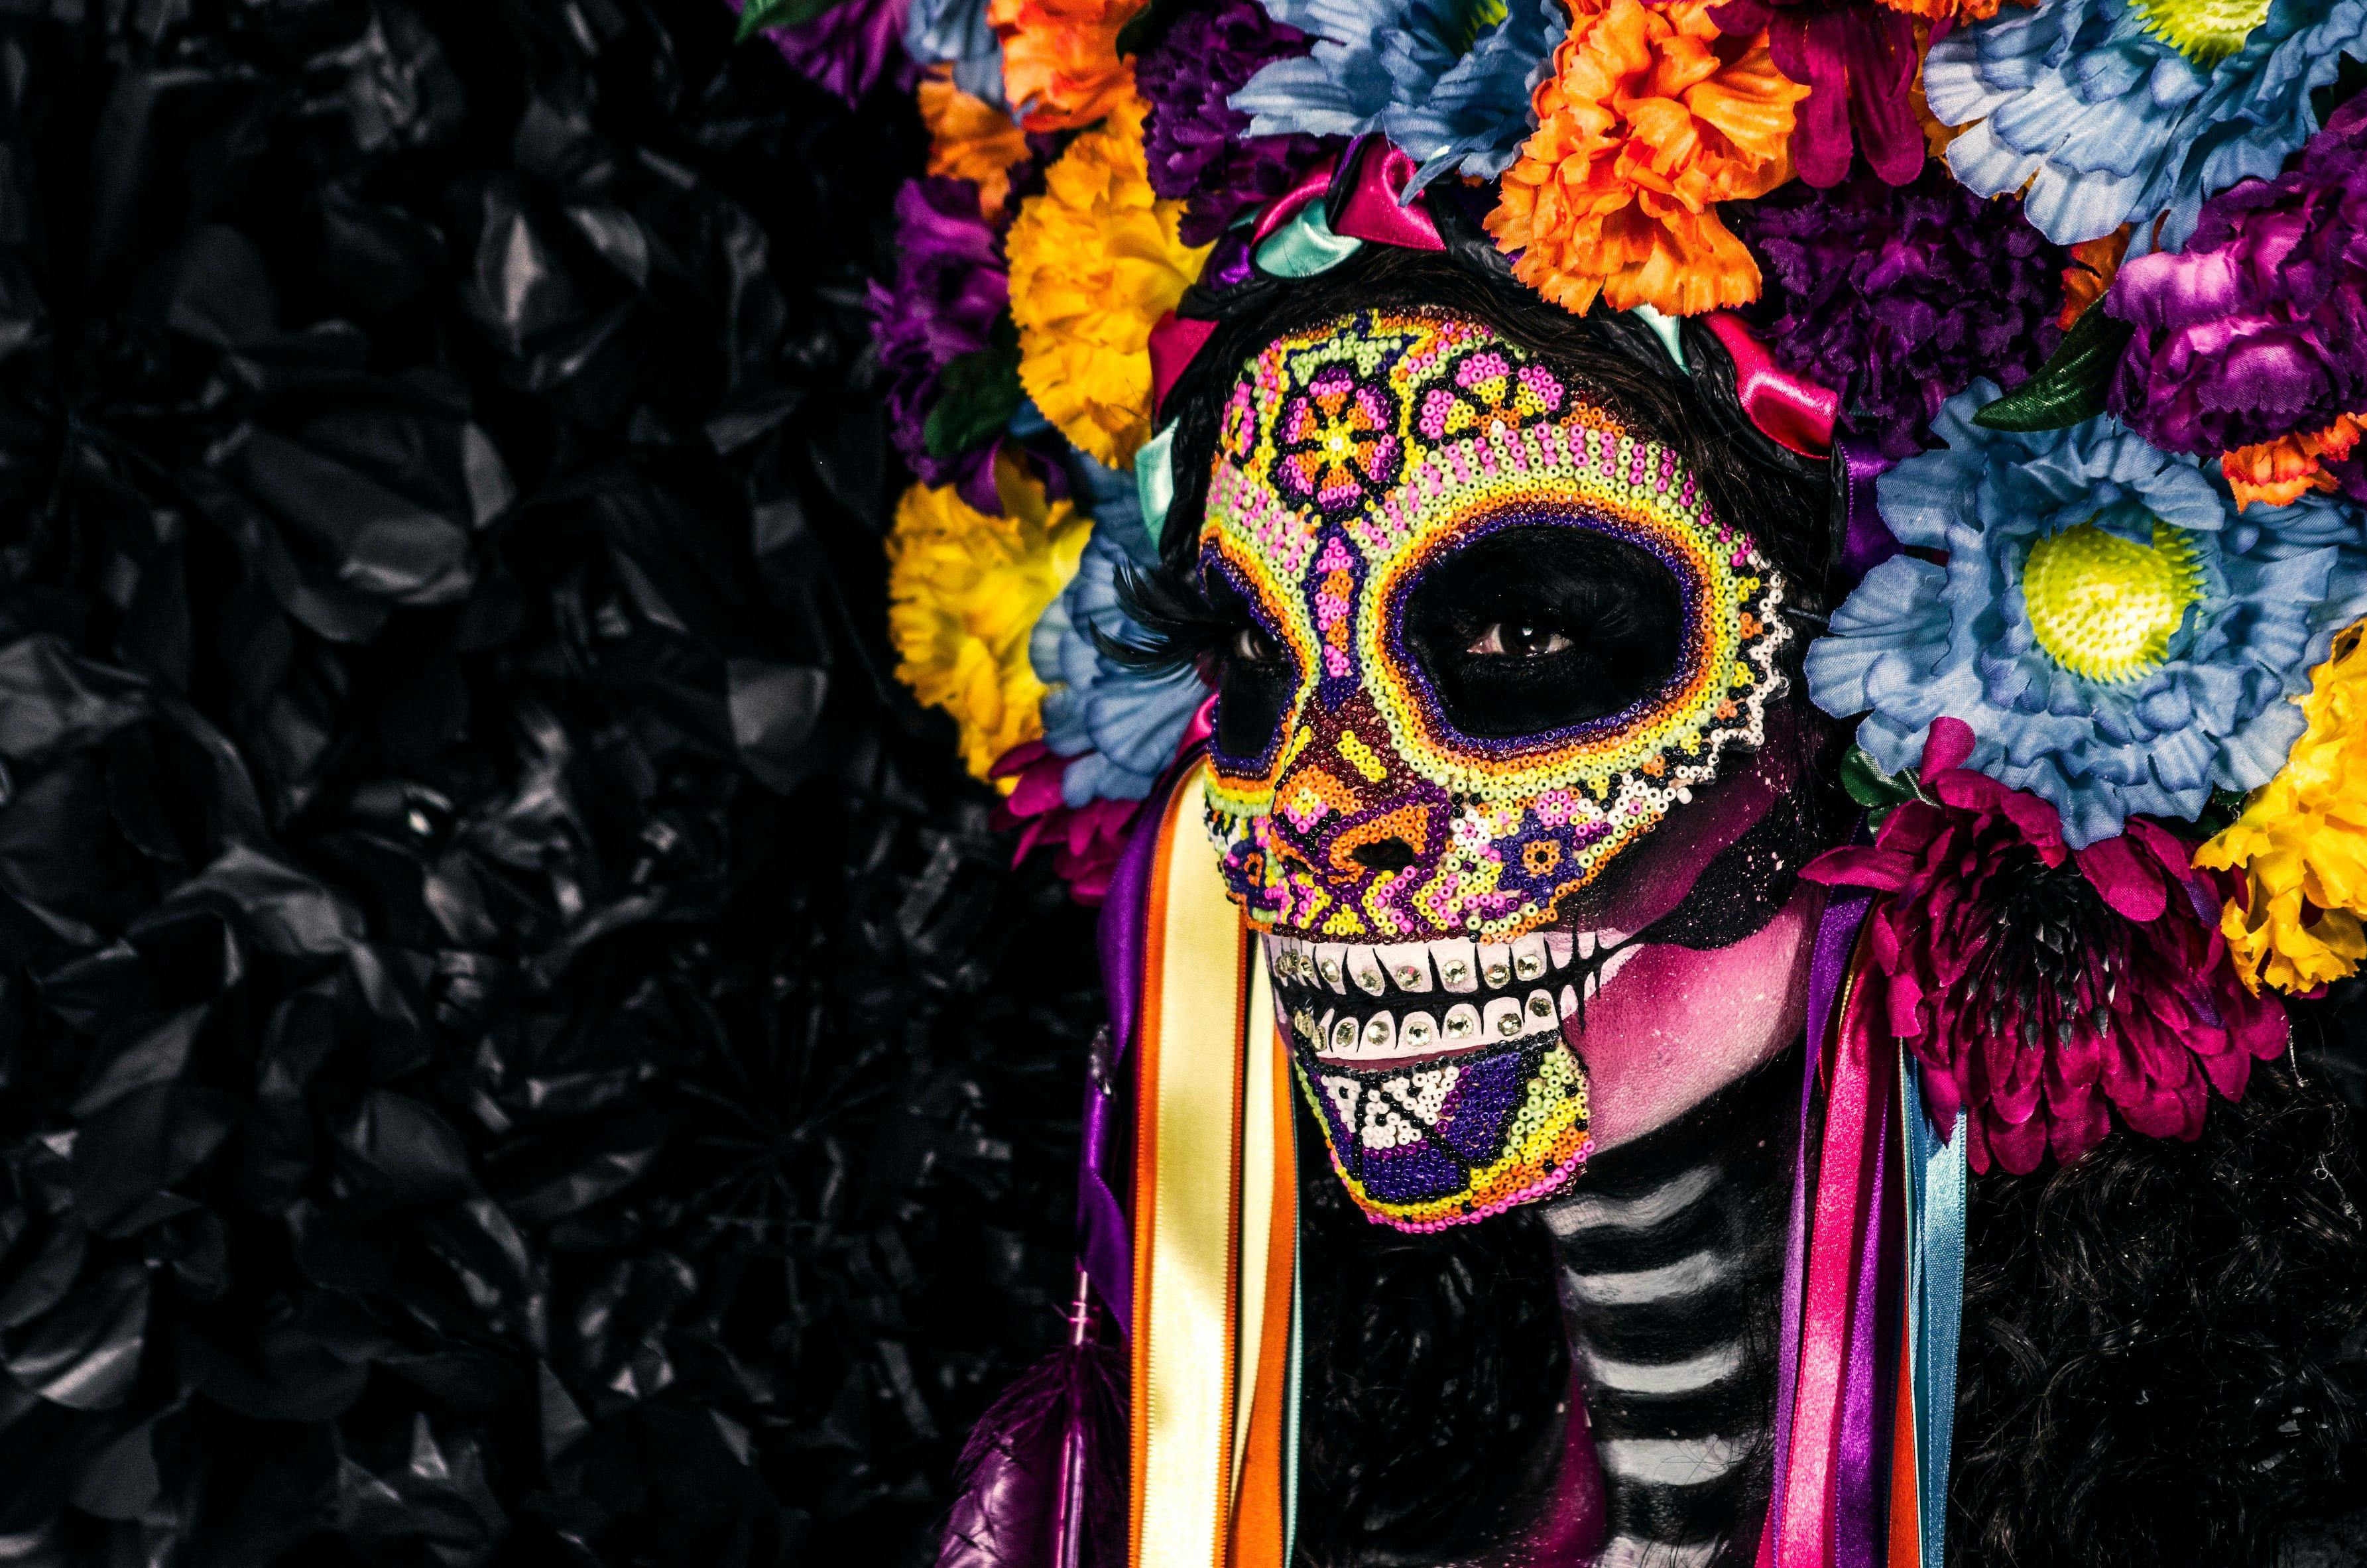 Woman dressed up for the Day of the Dead in Mexico.